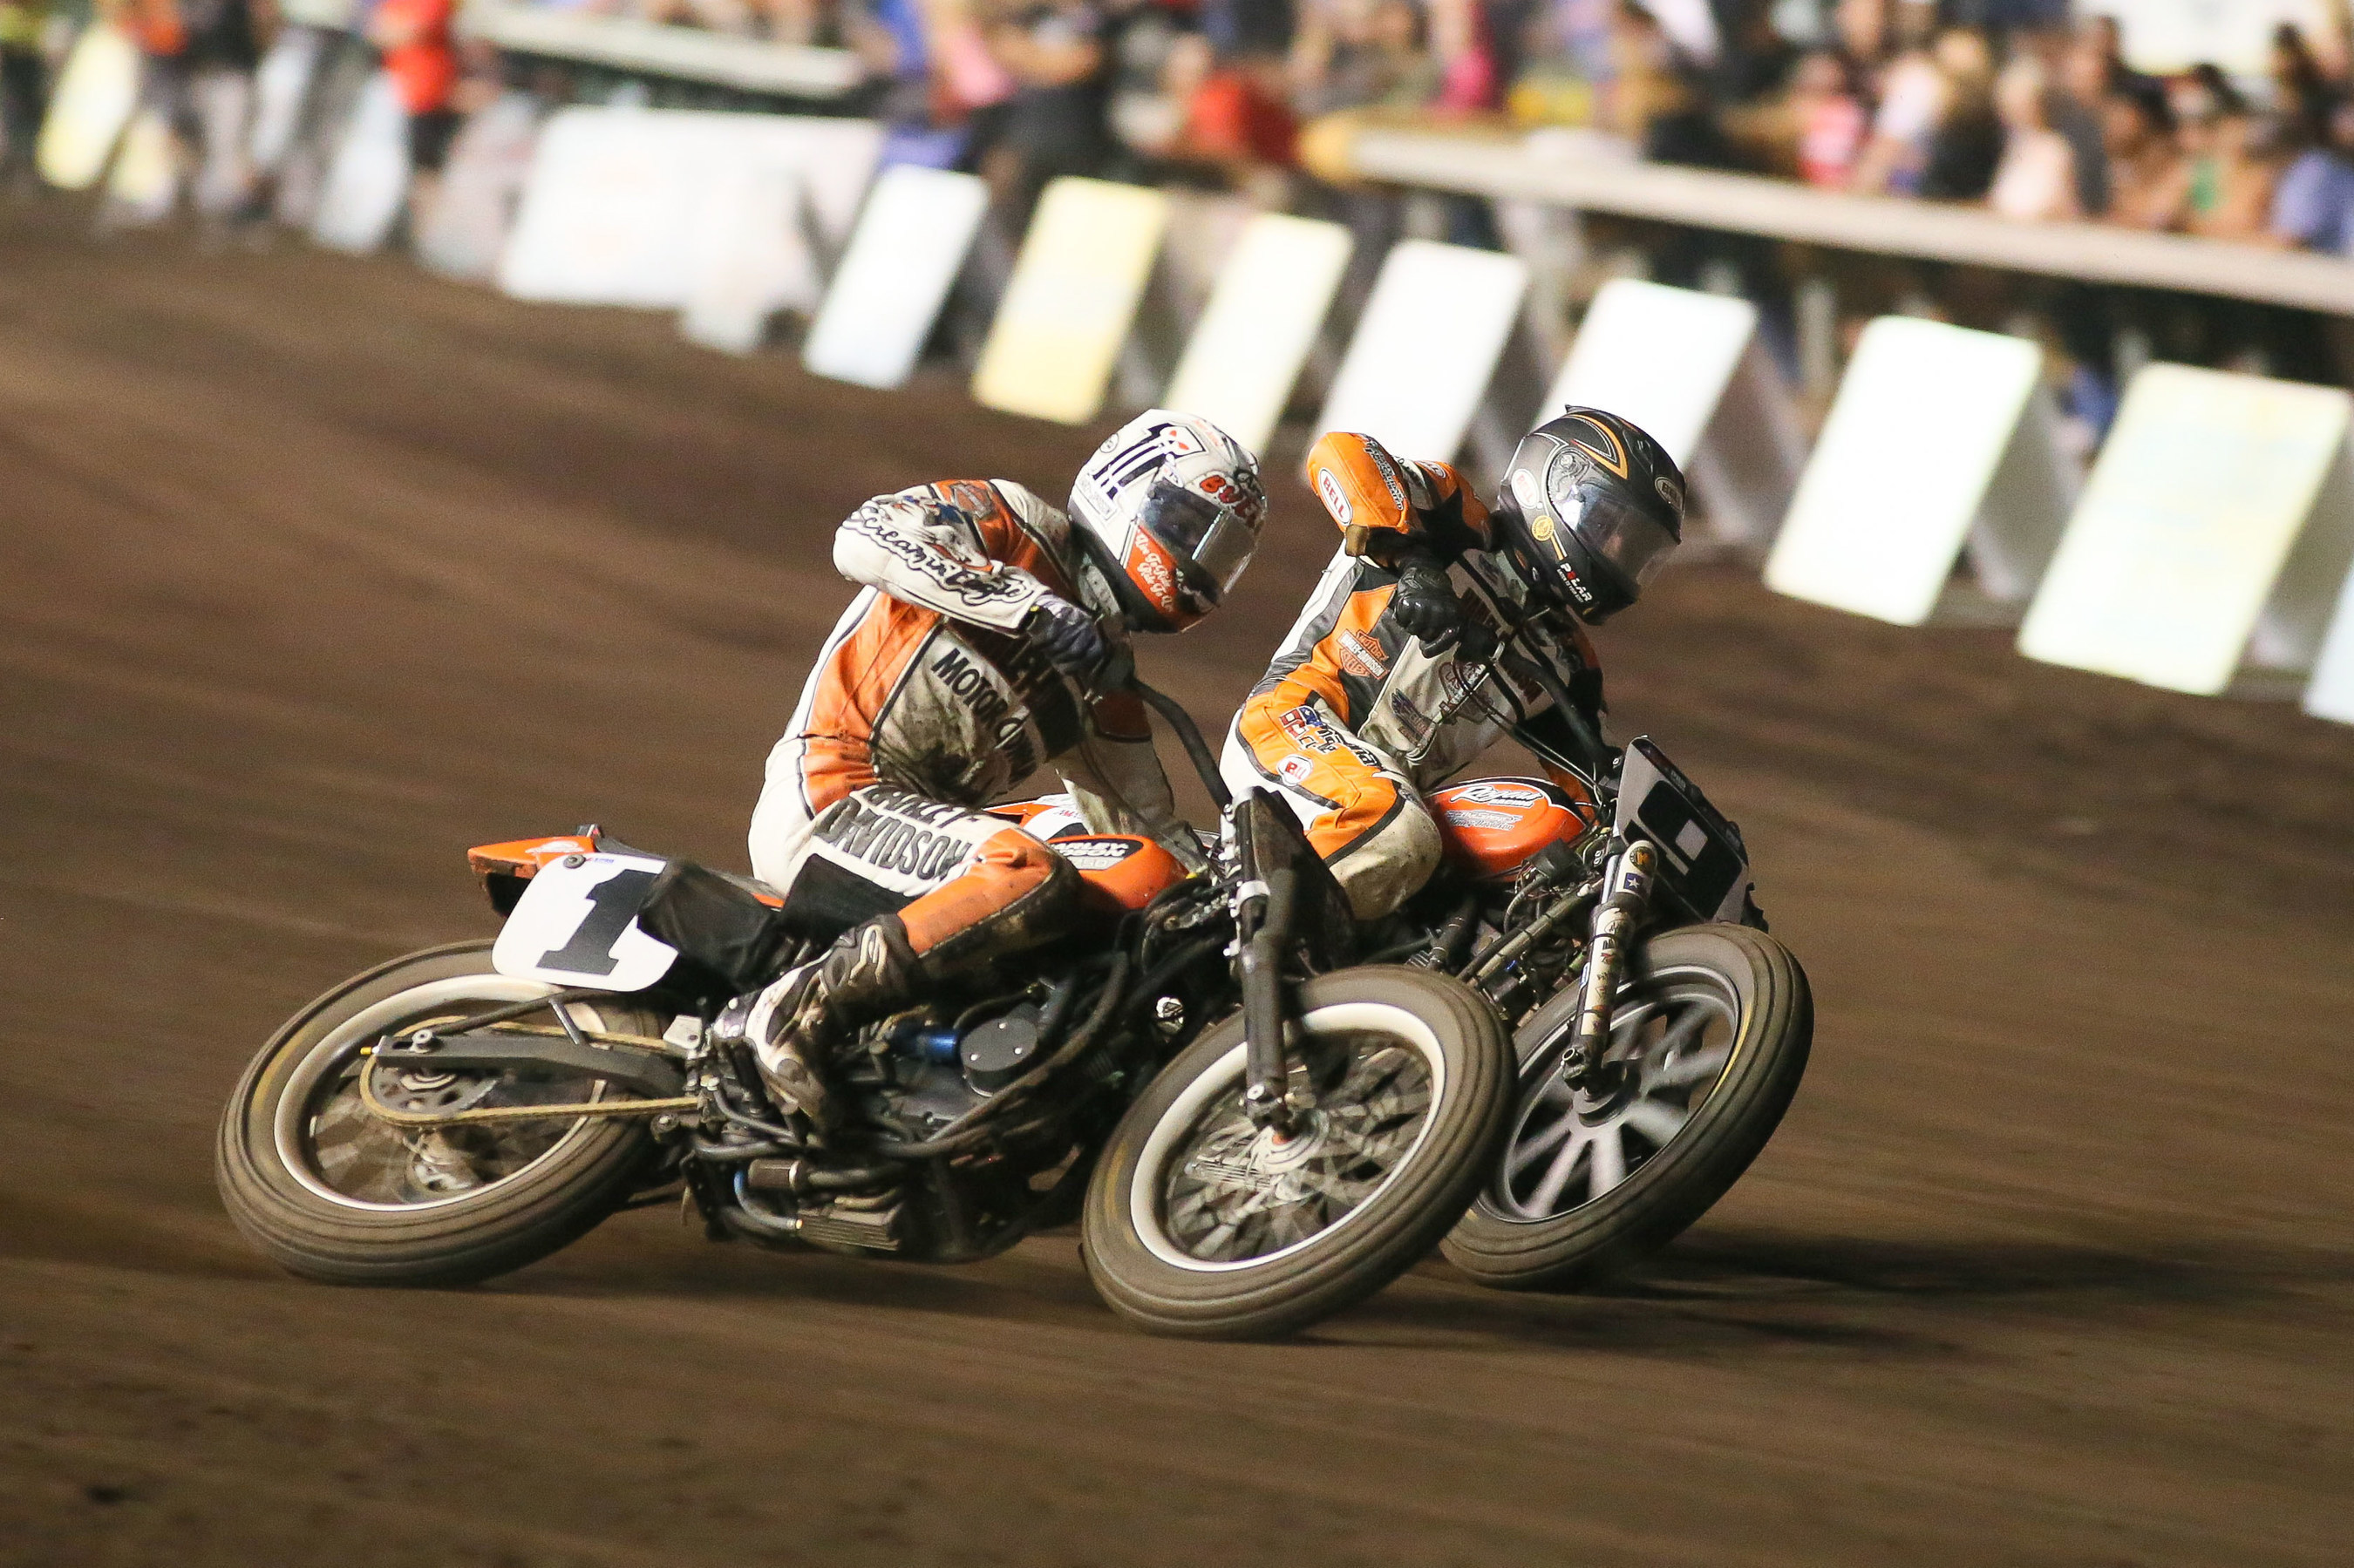 The inaugural race will take place June 4 in an invitational format with athletes like Brad Baker (left), Jared Mees (right) and others from around the world receiving the opportunity to tear up the track at Circuit of the Americas.